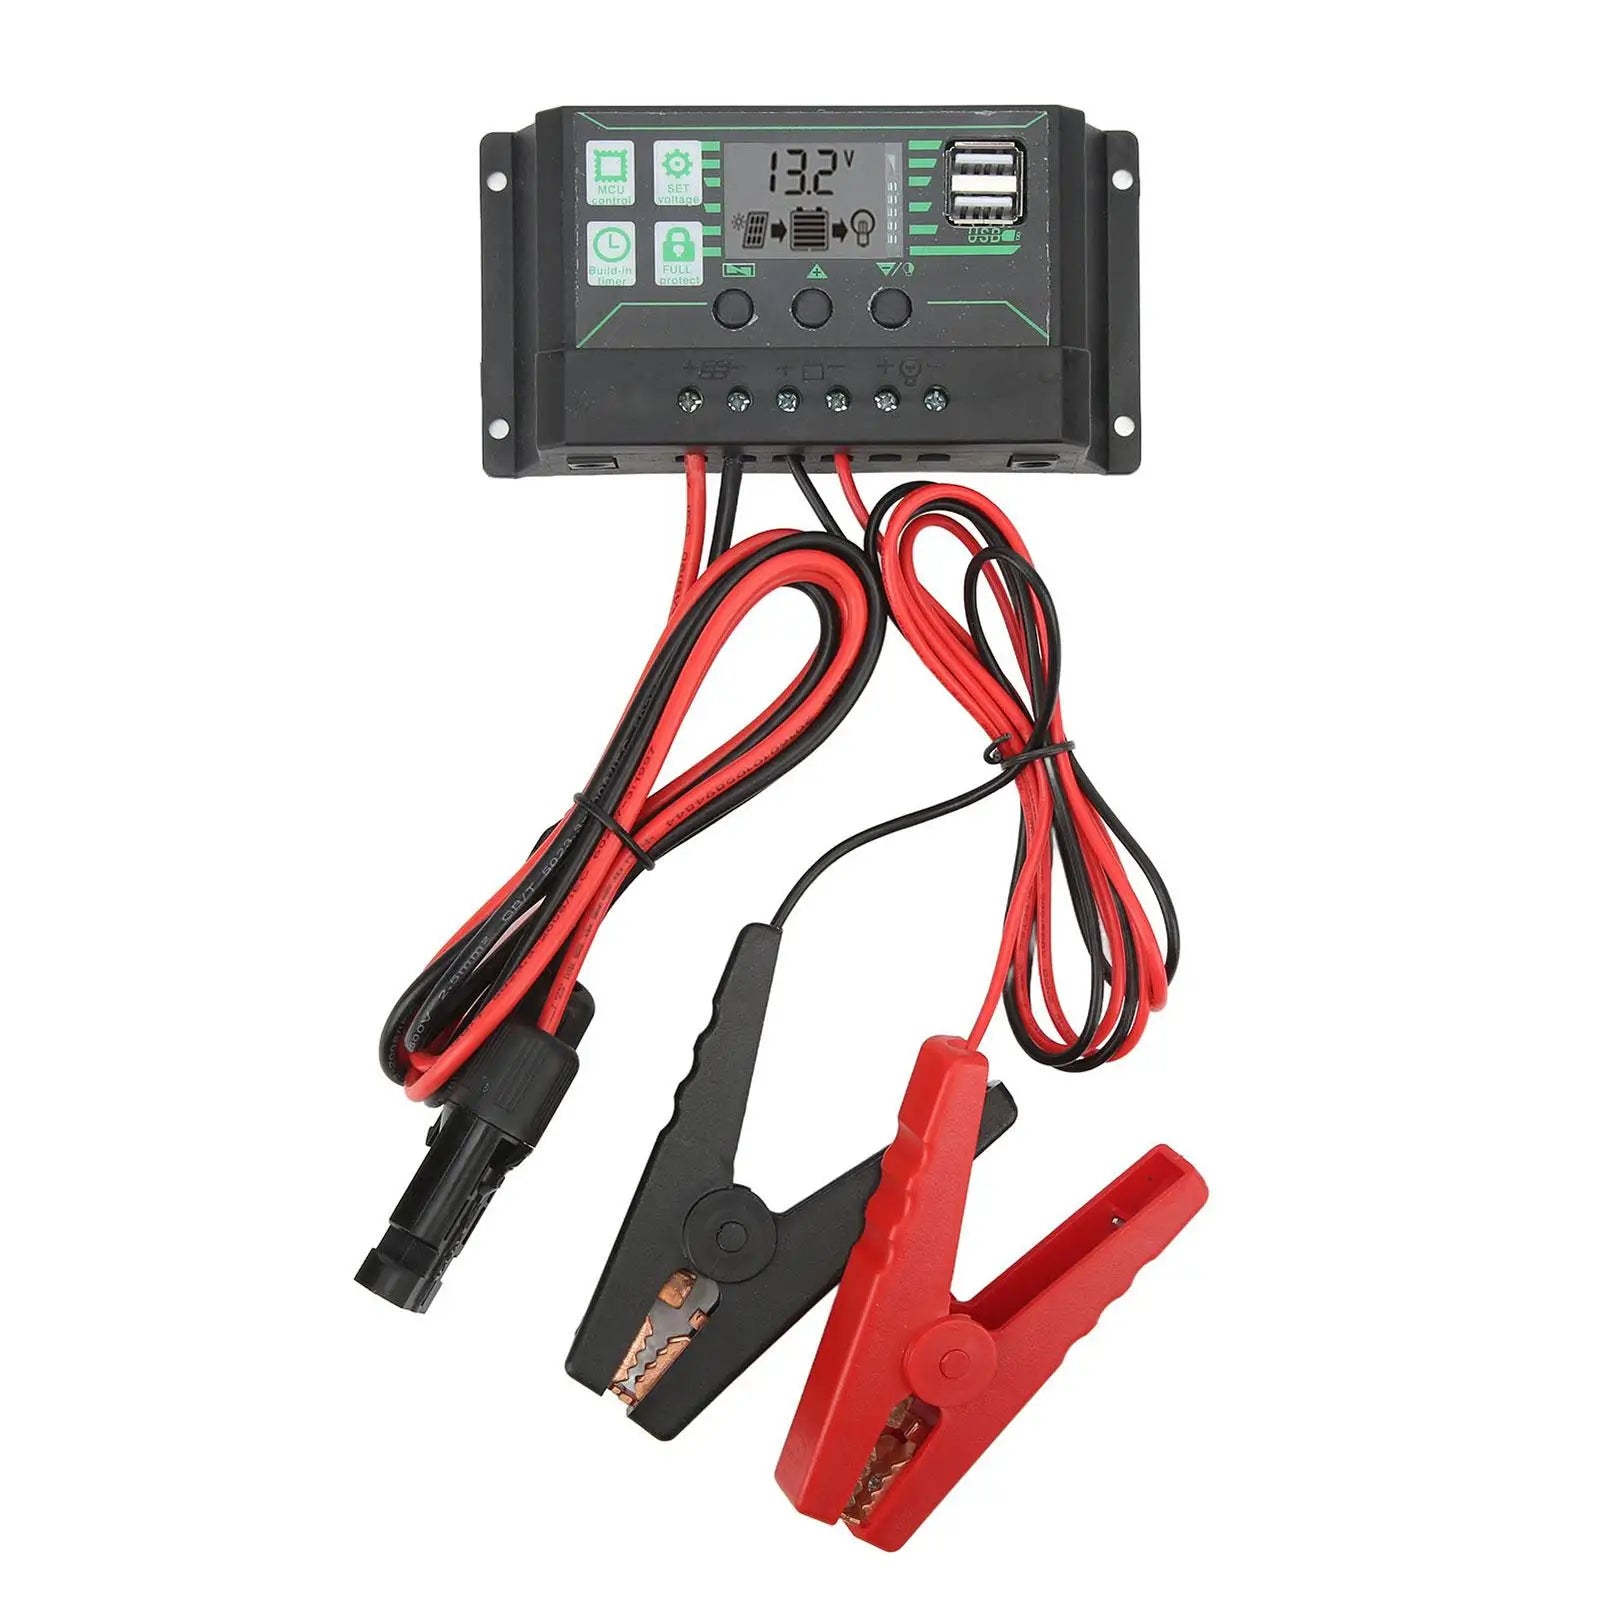 MPPT 10/20/30/60/100A Solar Charge Controller, Solar charge controller with wide LCD screen, suitable for 12/24V panels and batteries.